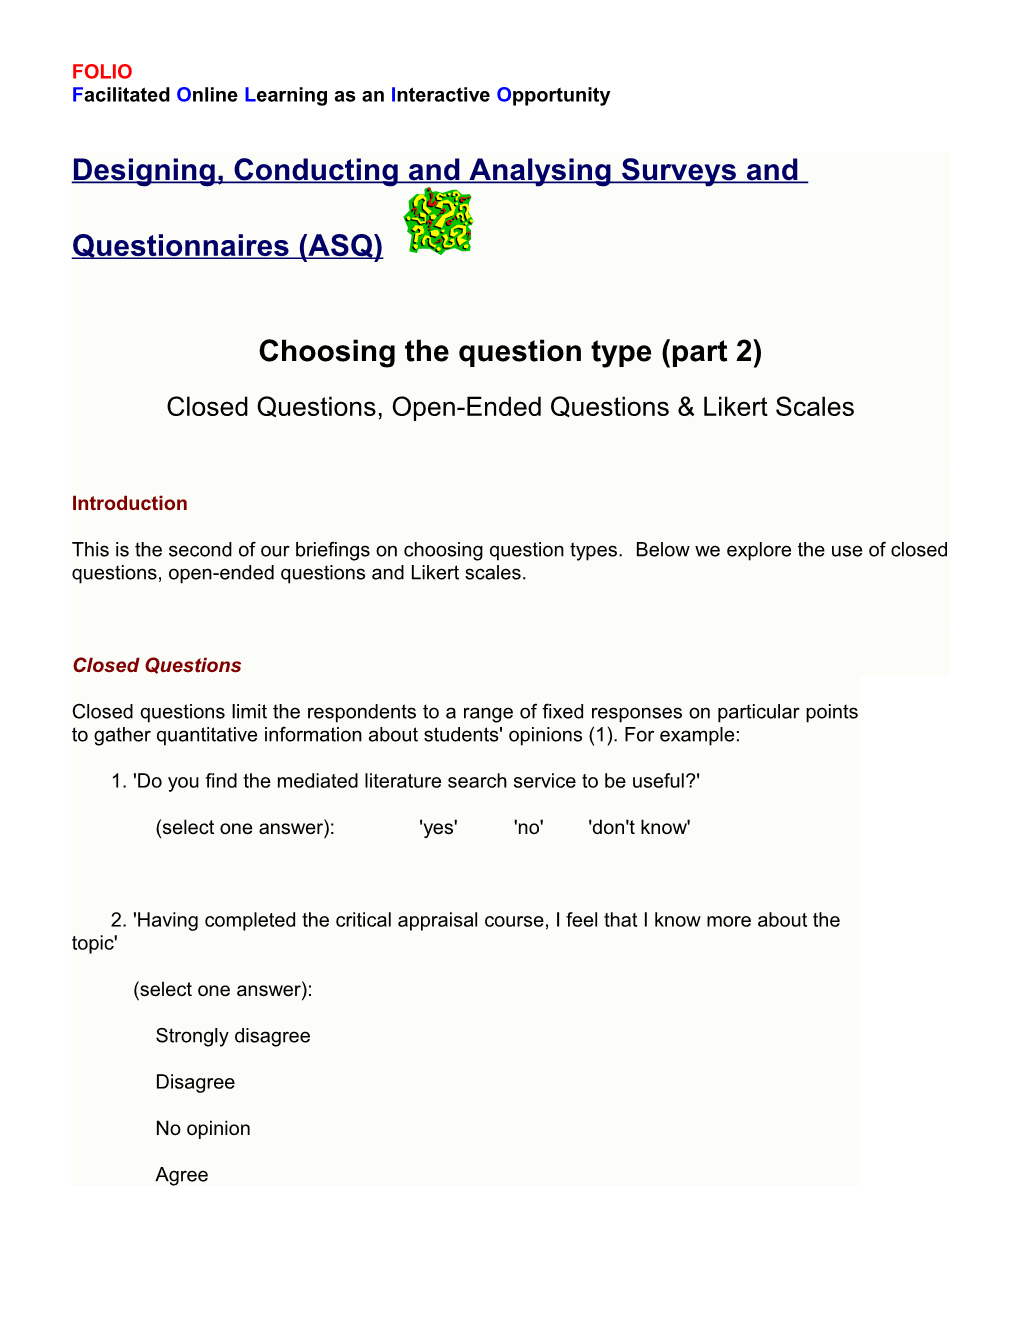 Designing, Conducting and Analysing Surveys and Questionnaires (ASQ)